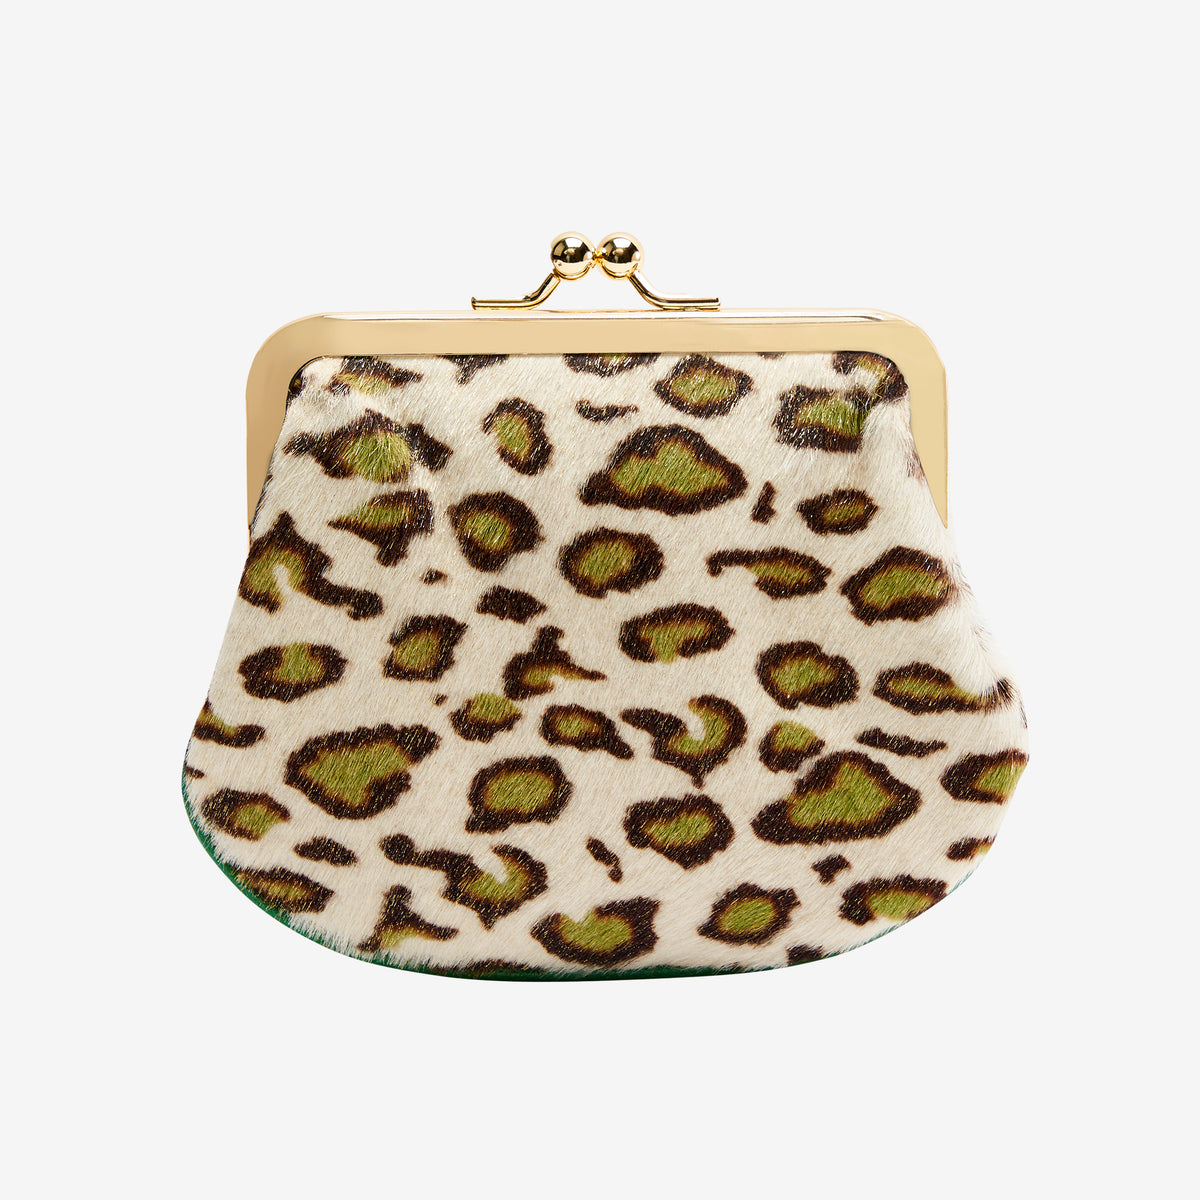    tusk-468-womens-printed-haircalf-framed-coin-purse-white-and-black-front